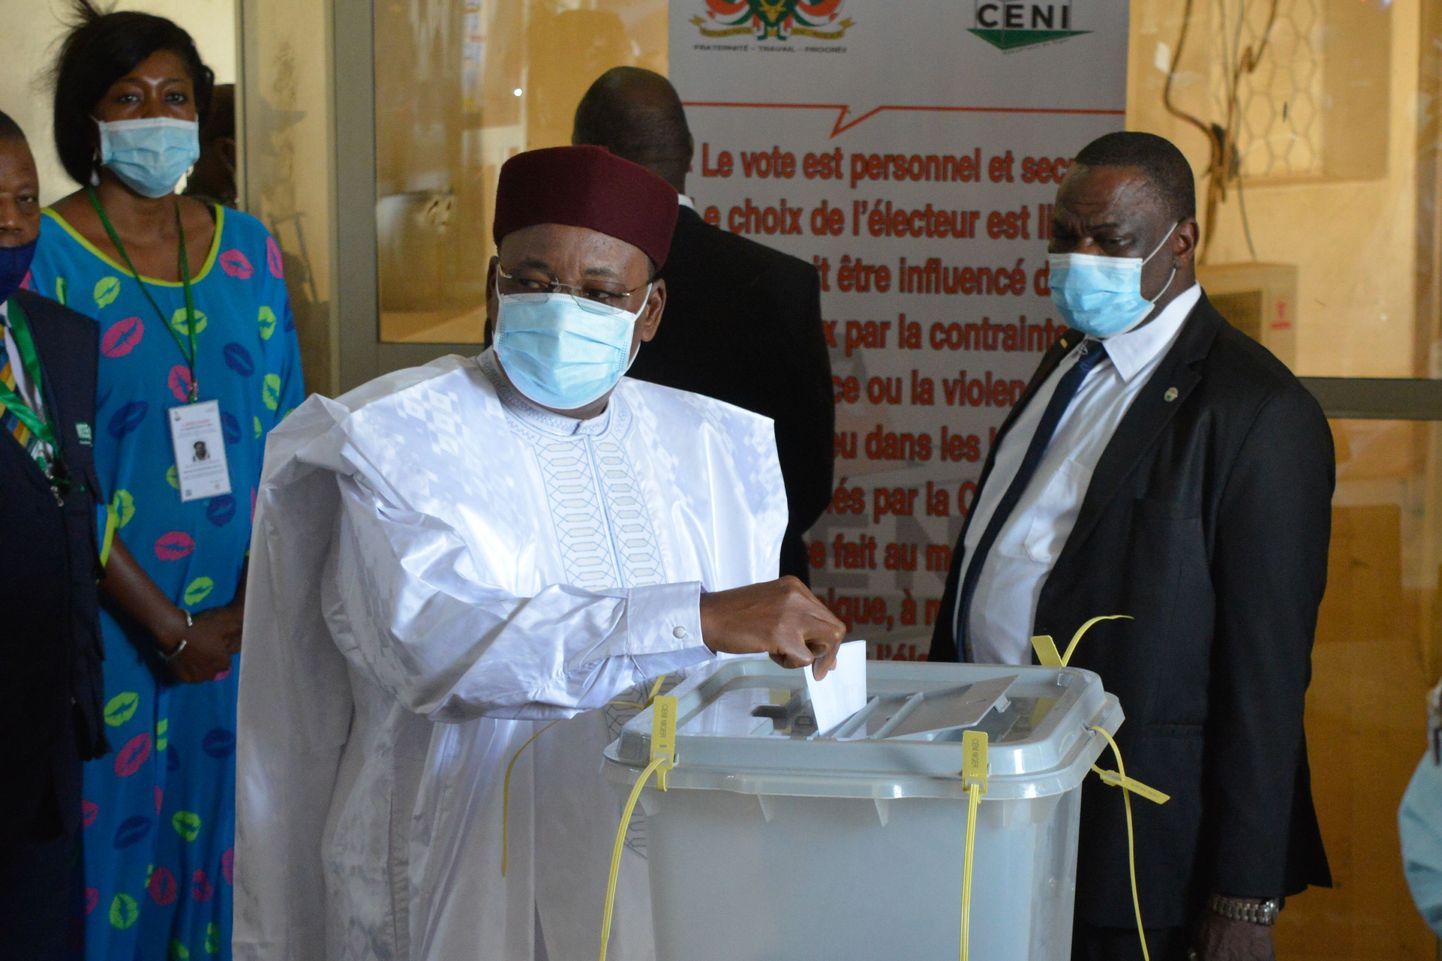 (210221) -- NIAMEY, Feb. 21, 2021 (Xinhua) -- The outgoing Nigerien President Mahamadou Issoufou casts his vote at a polling station in Niamey, Niger, Feb. 21, 2021. Voting for the second round of Niger's presidential election began on Sunday as more than 7.4 million Nigeriens are expected at polling stations to choose the successor of the outgoing president Mahamadou Issoufou. (Xinhua) - Xinhua -//CHINENOUVELLE_1.0929/2102211754/Credit:CHINE NOUVELLE/SIPA/2102211801